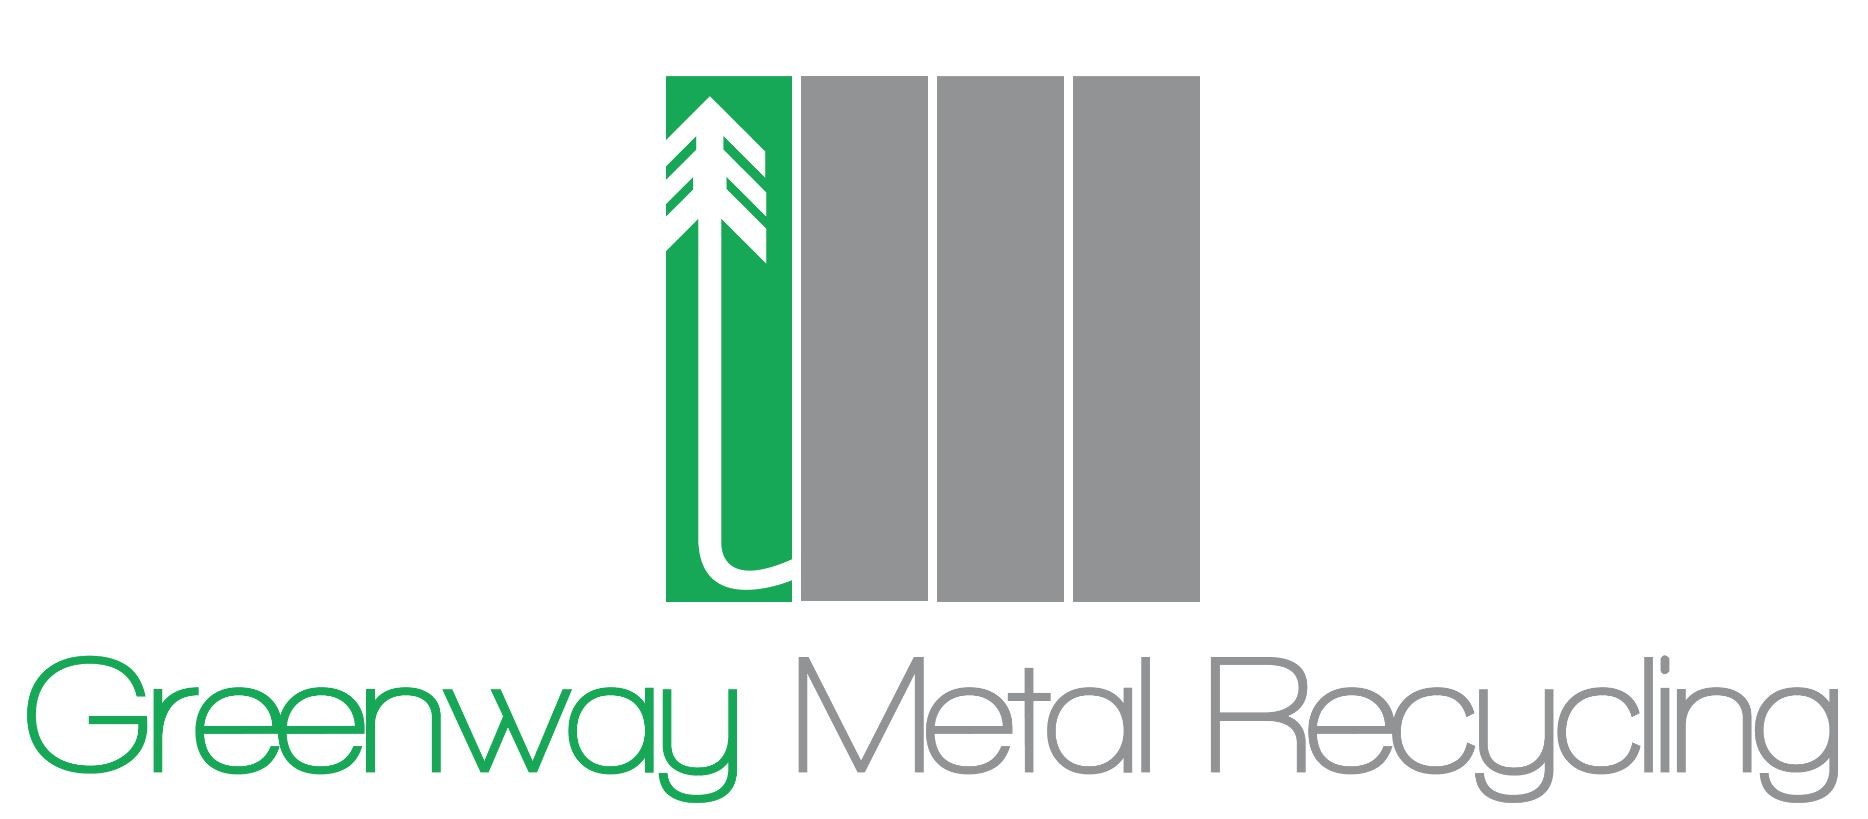 Greenway Metal Recycling, Inc. review